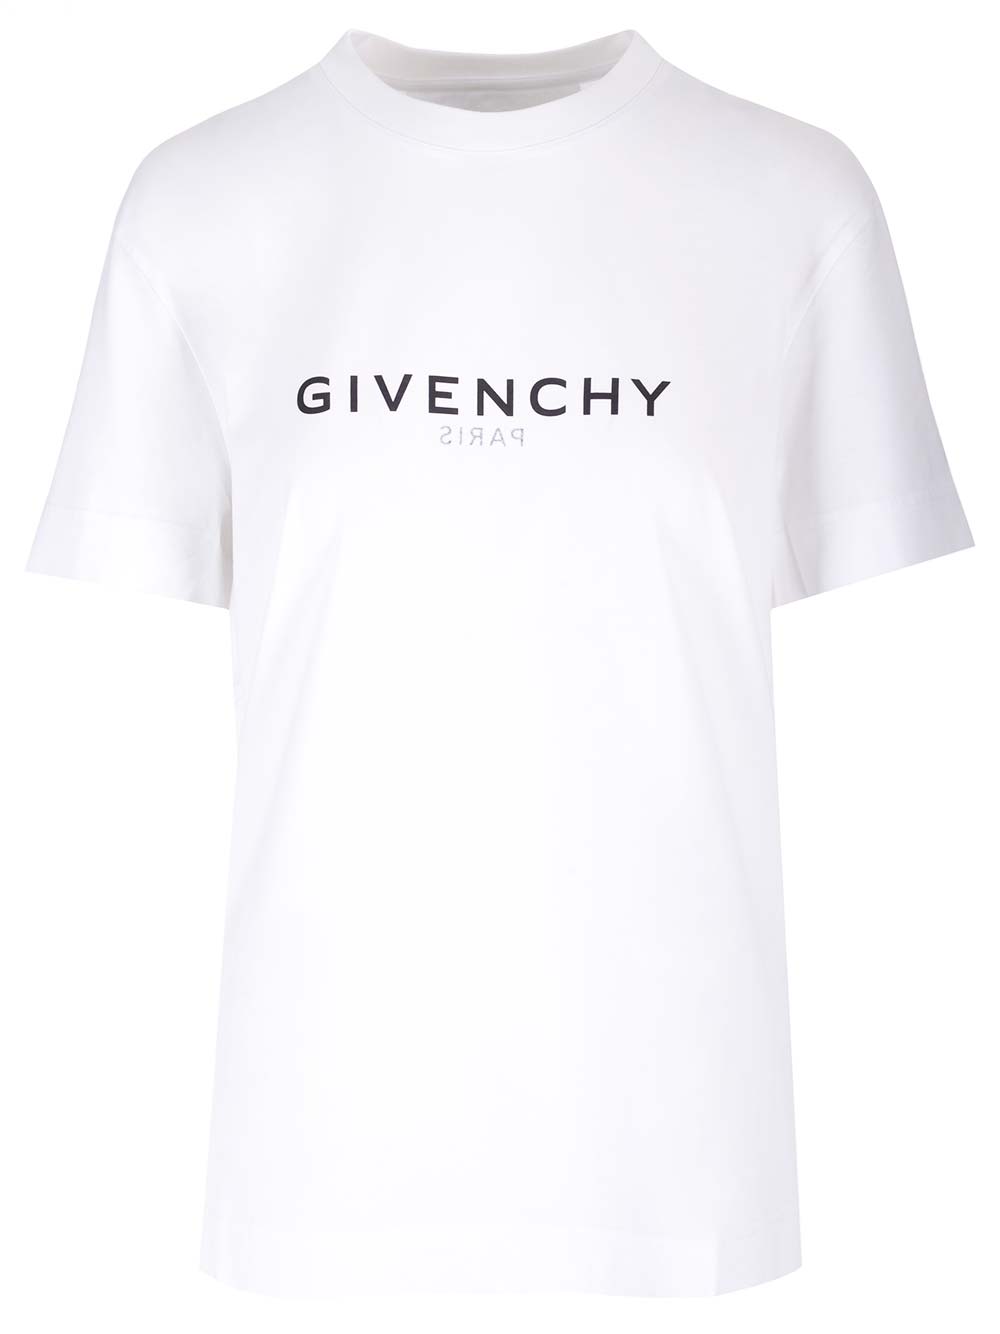 GIVENCHY RELAXED FIT T-SHIRT